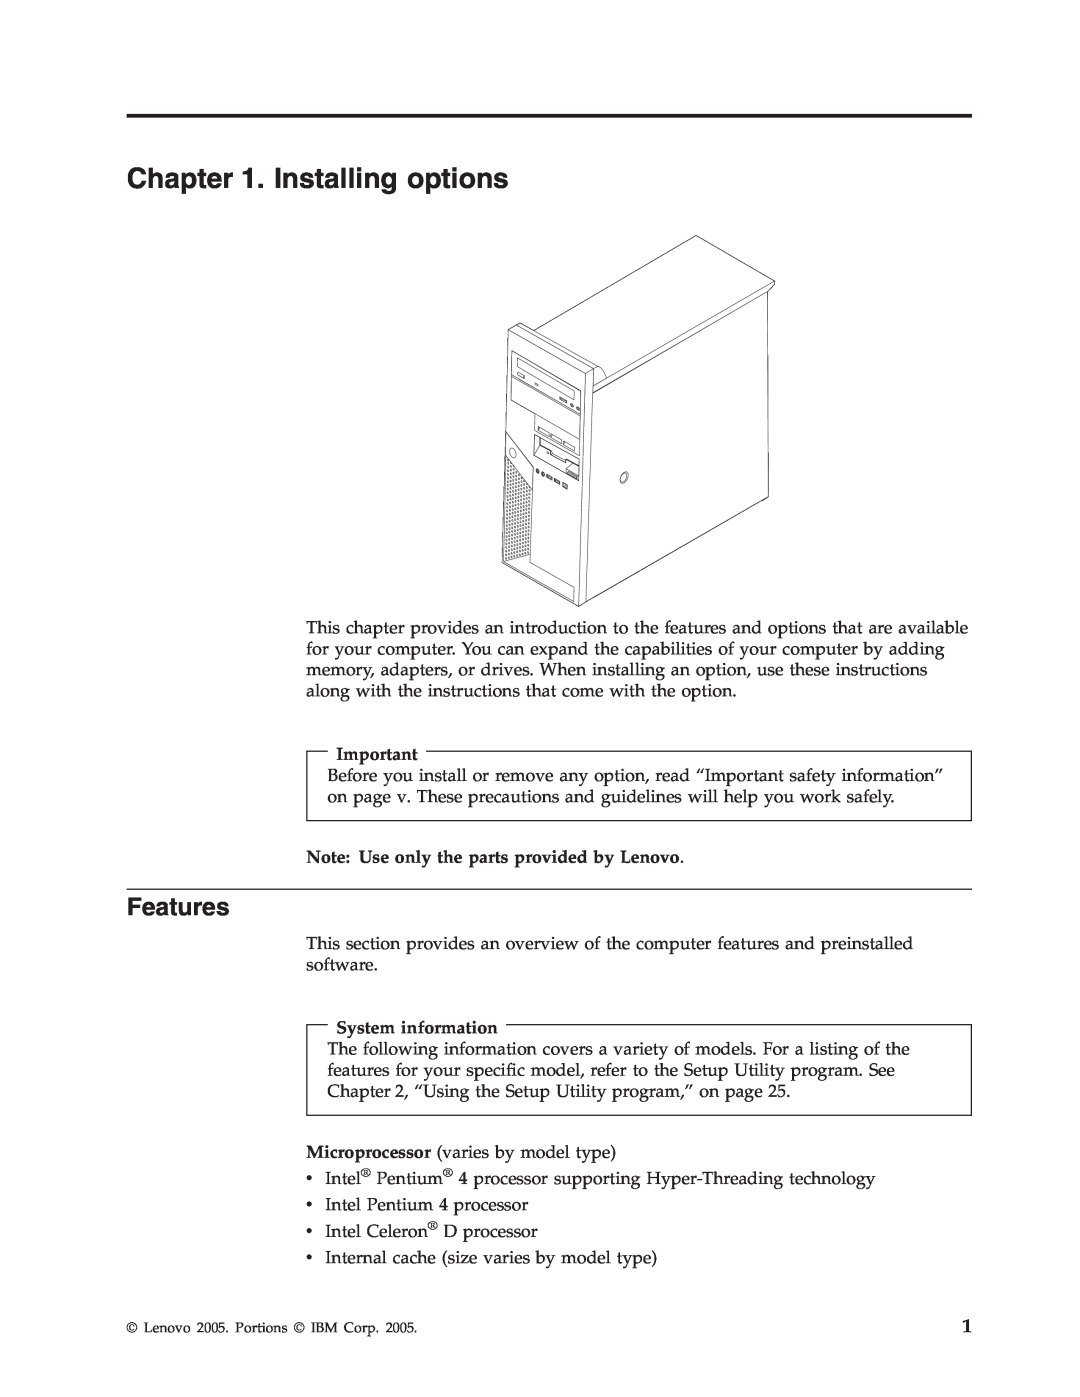 Lenovo 9213, 9212 manual Installing options, Features 